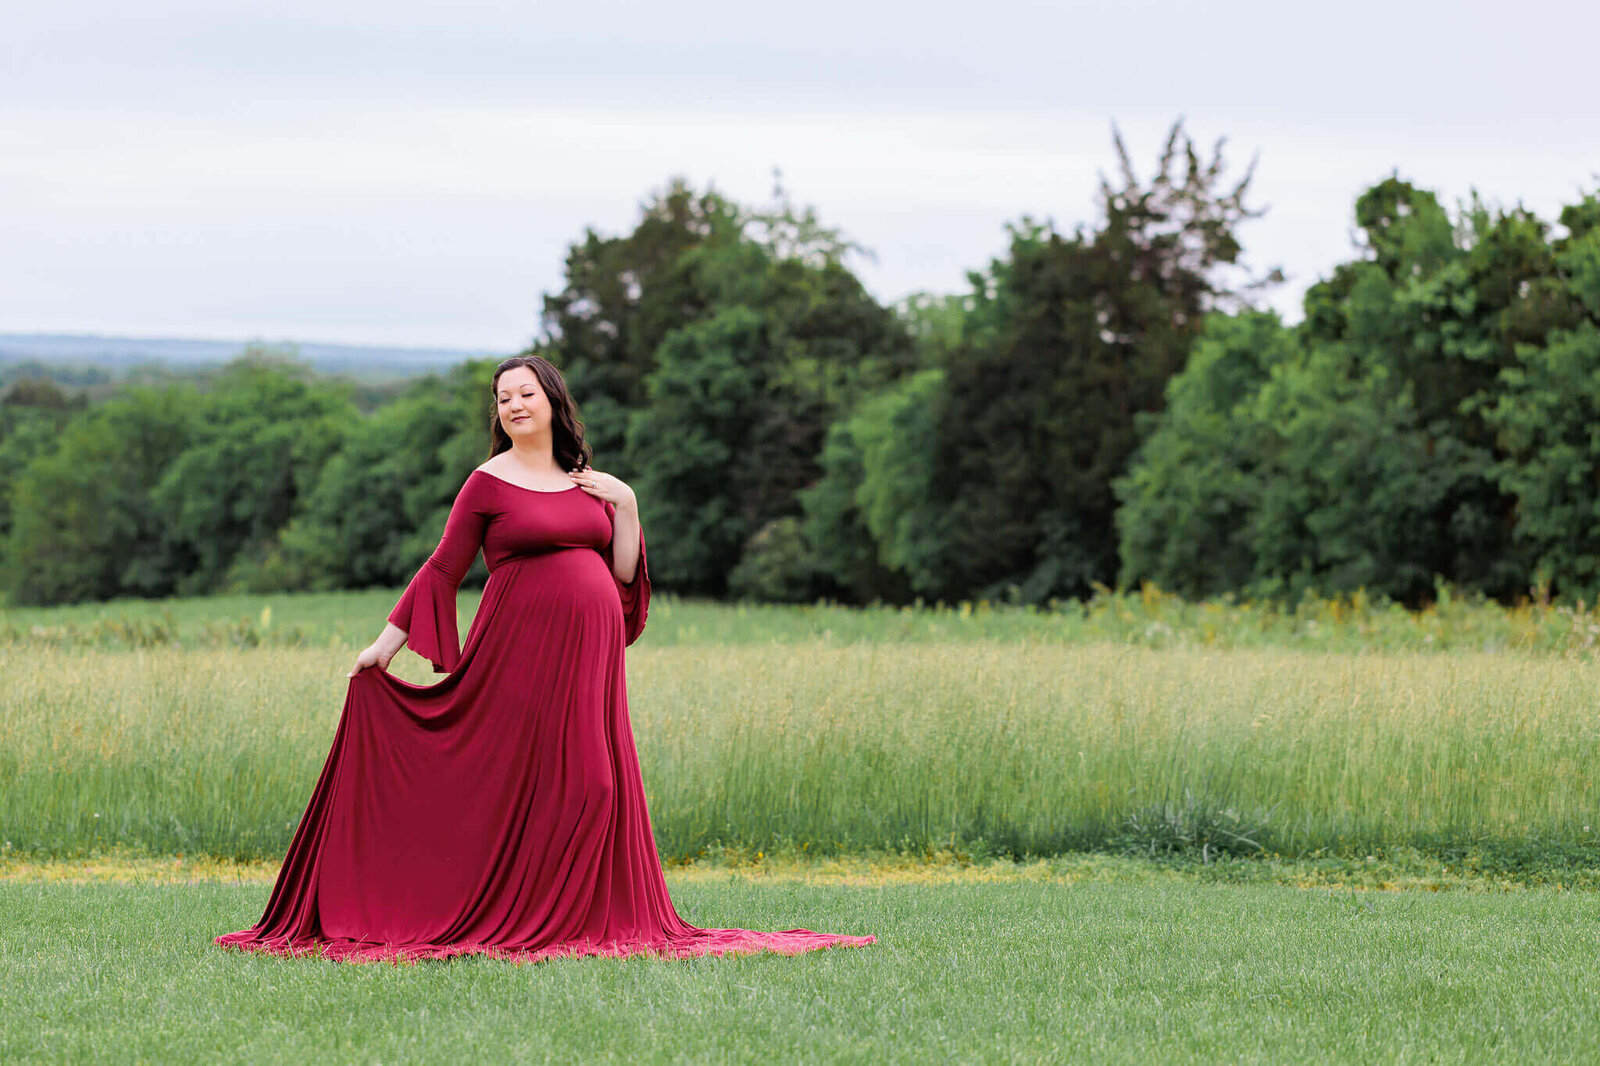 A woman in a red dress posing for her Manassas maternity portrait session.